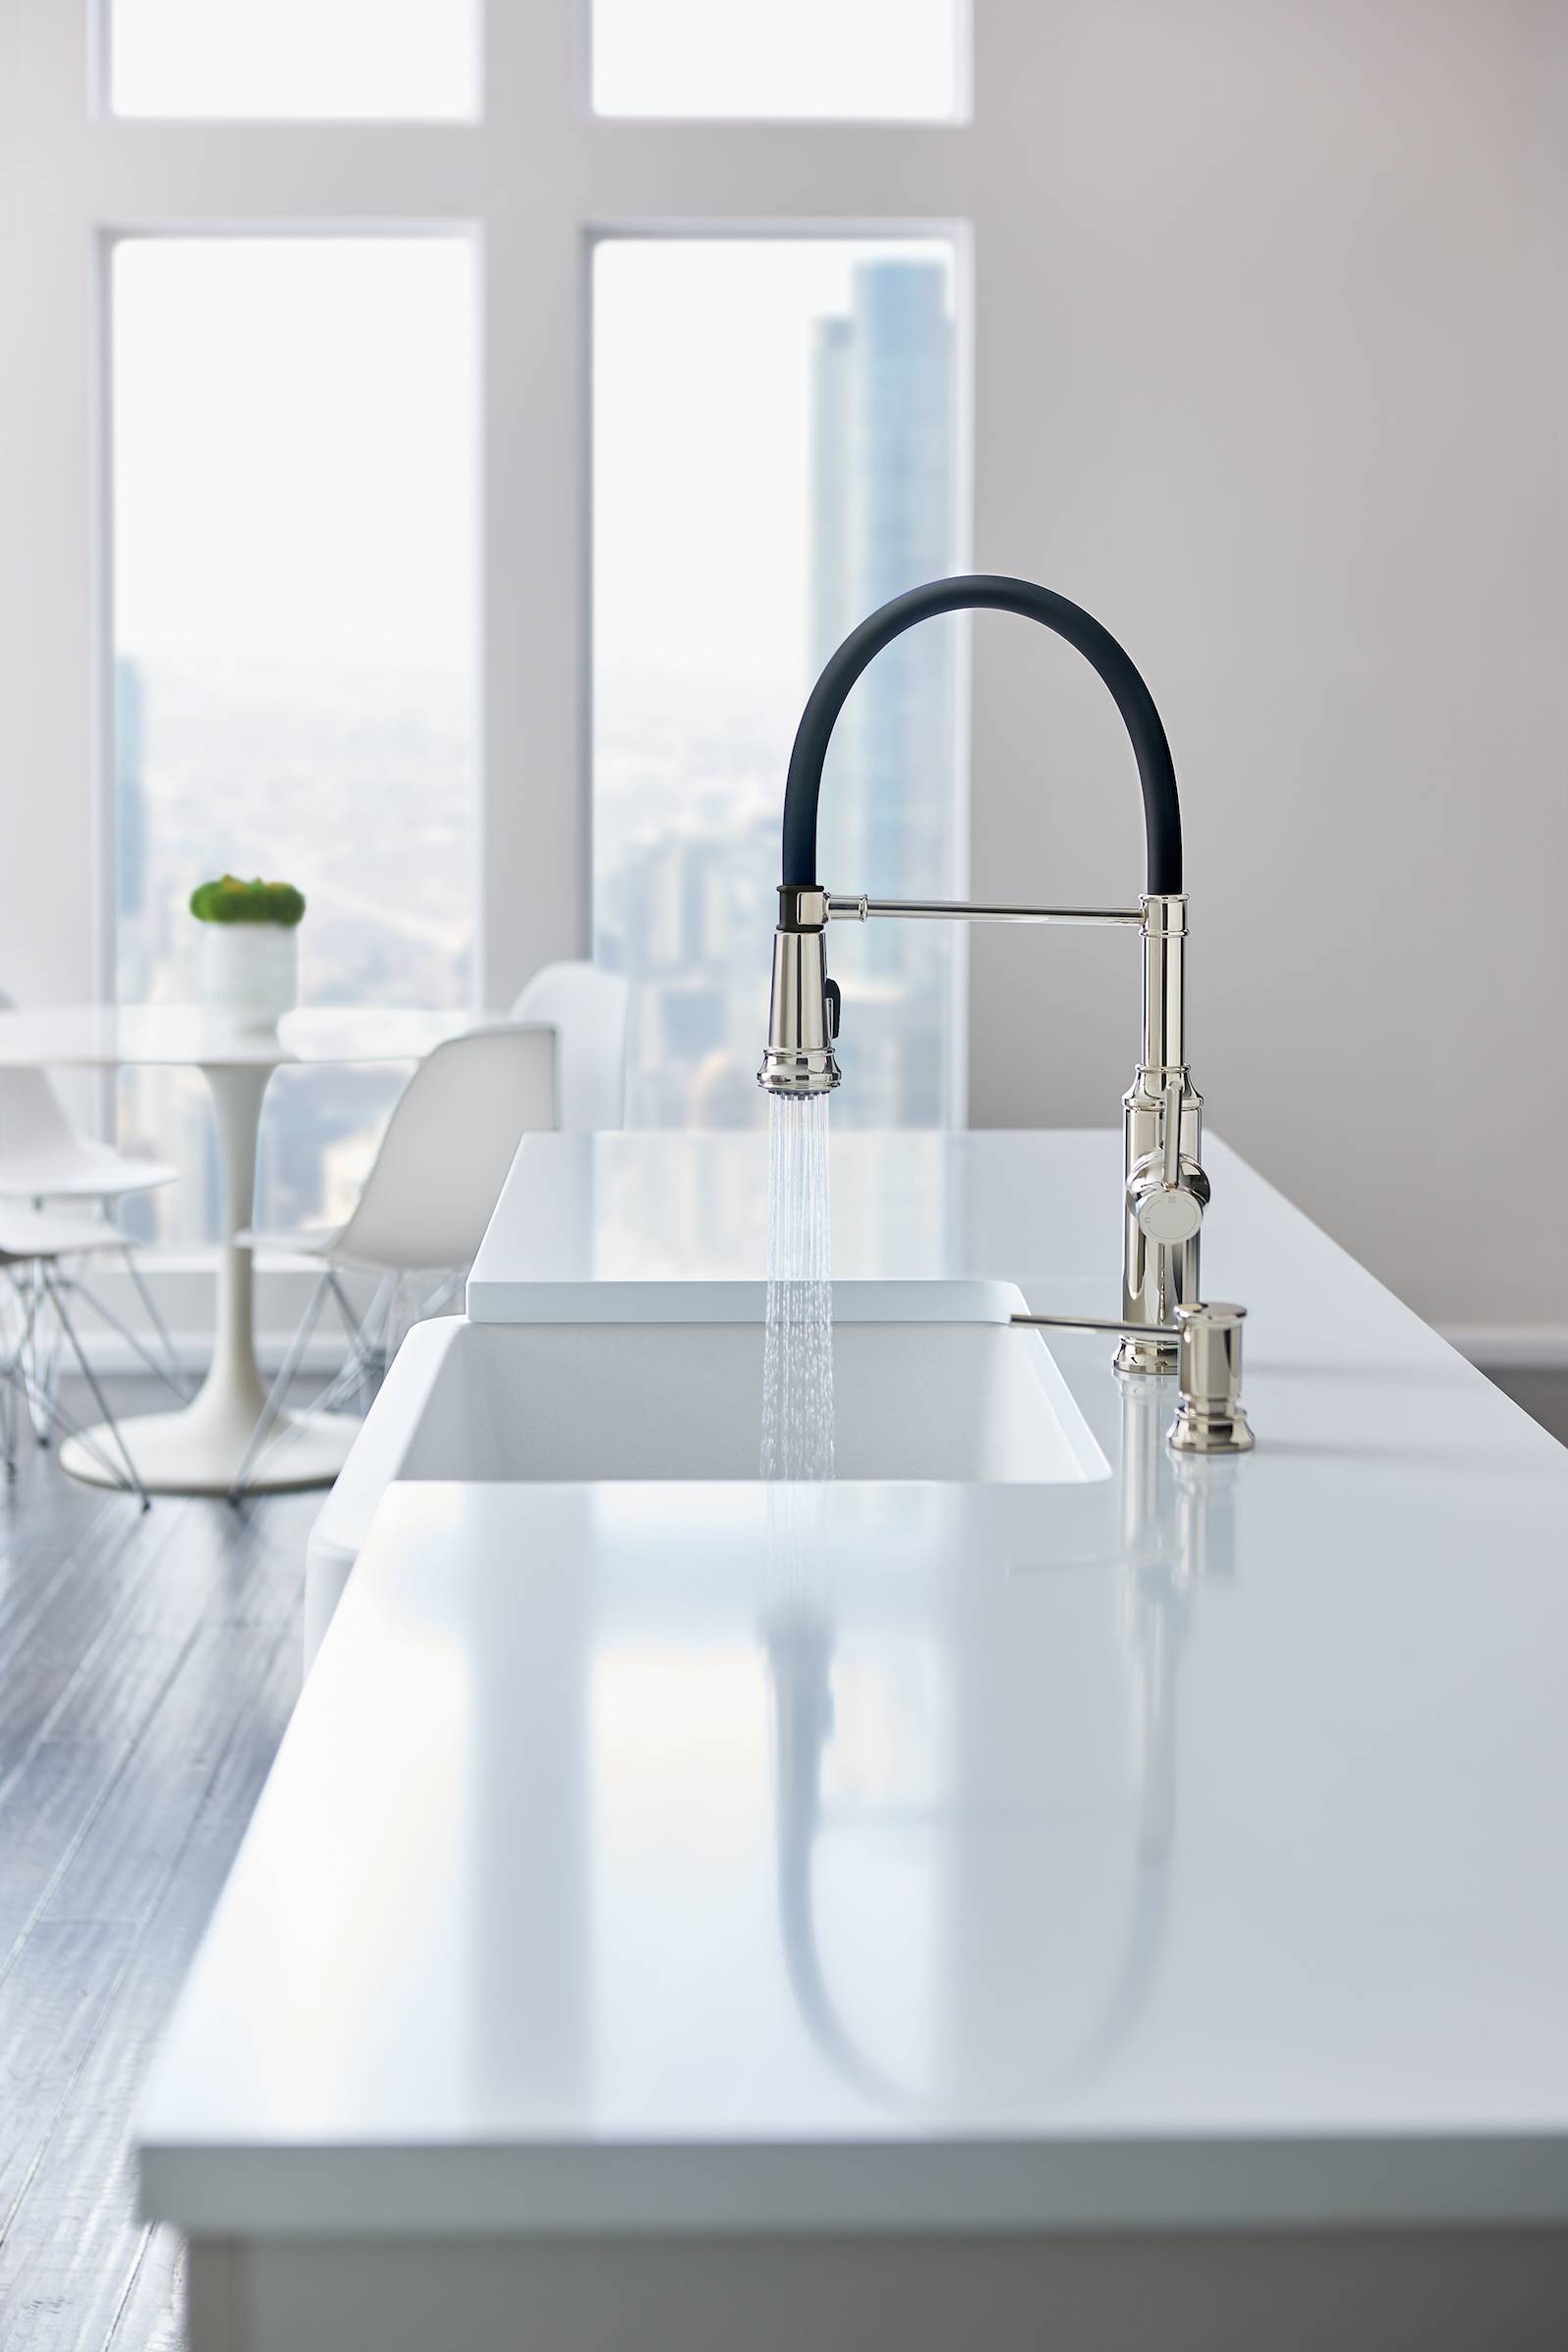 A white kitchen island sink with a black no touch faucet in a skyscraper dining room.